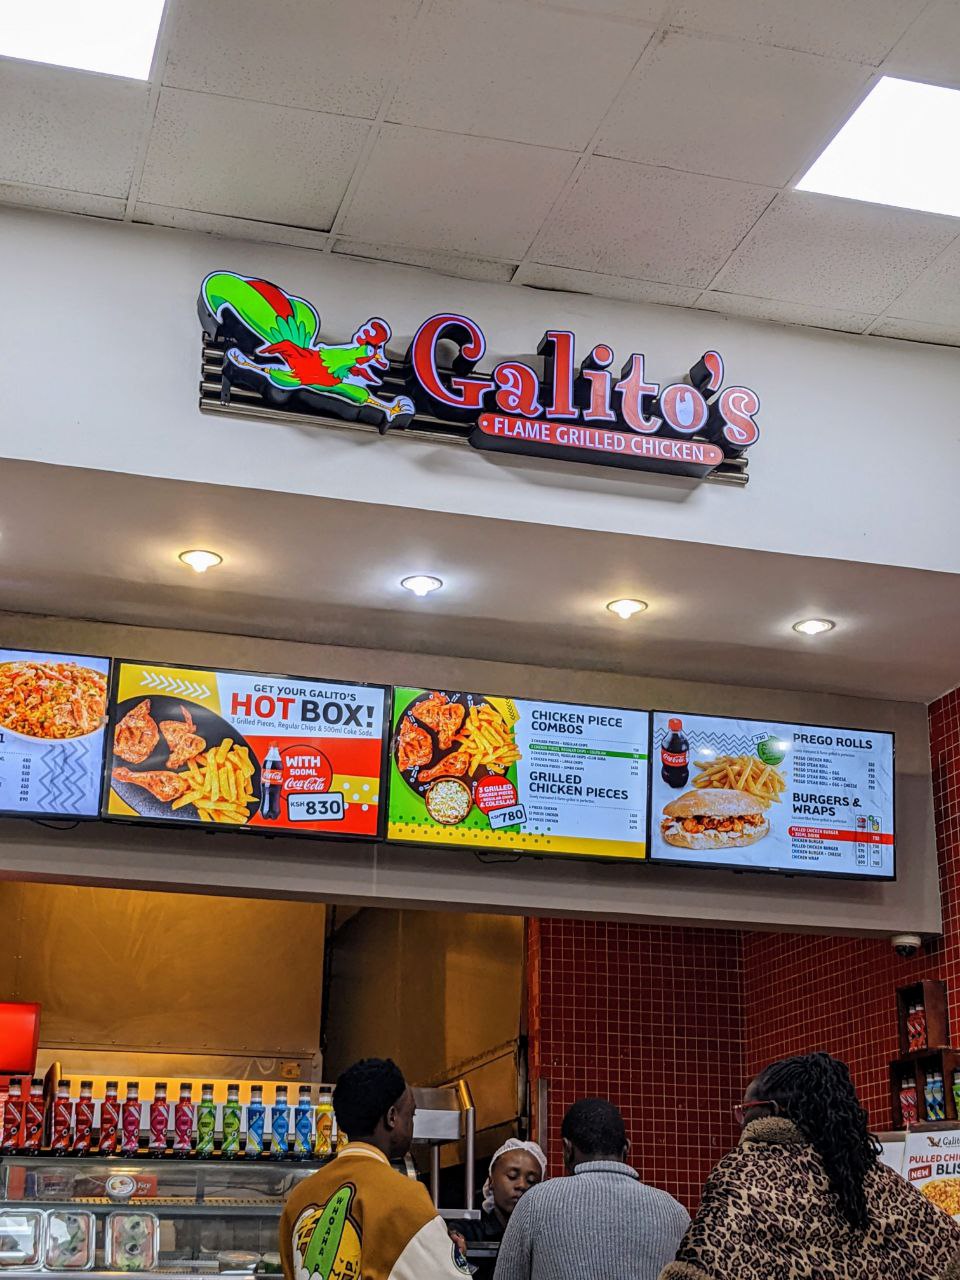 Read more about the article Galito’s Flame Grilled Chicken: Restaurant Review & Menu